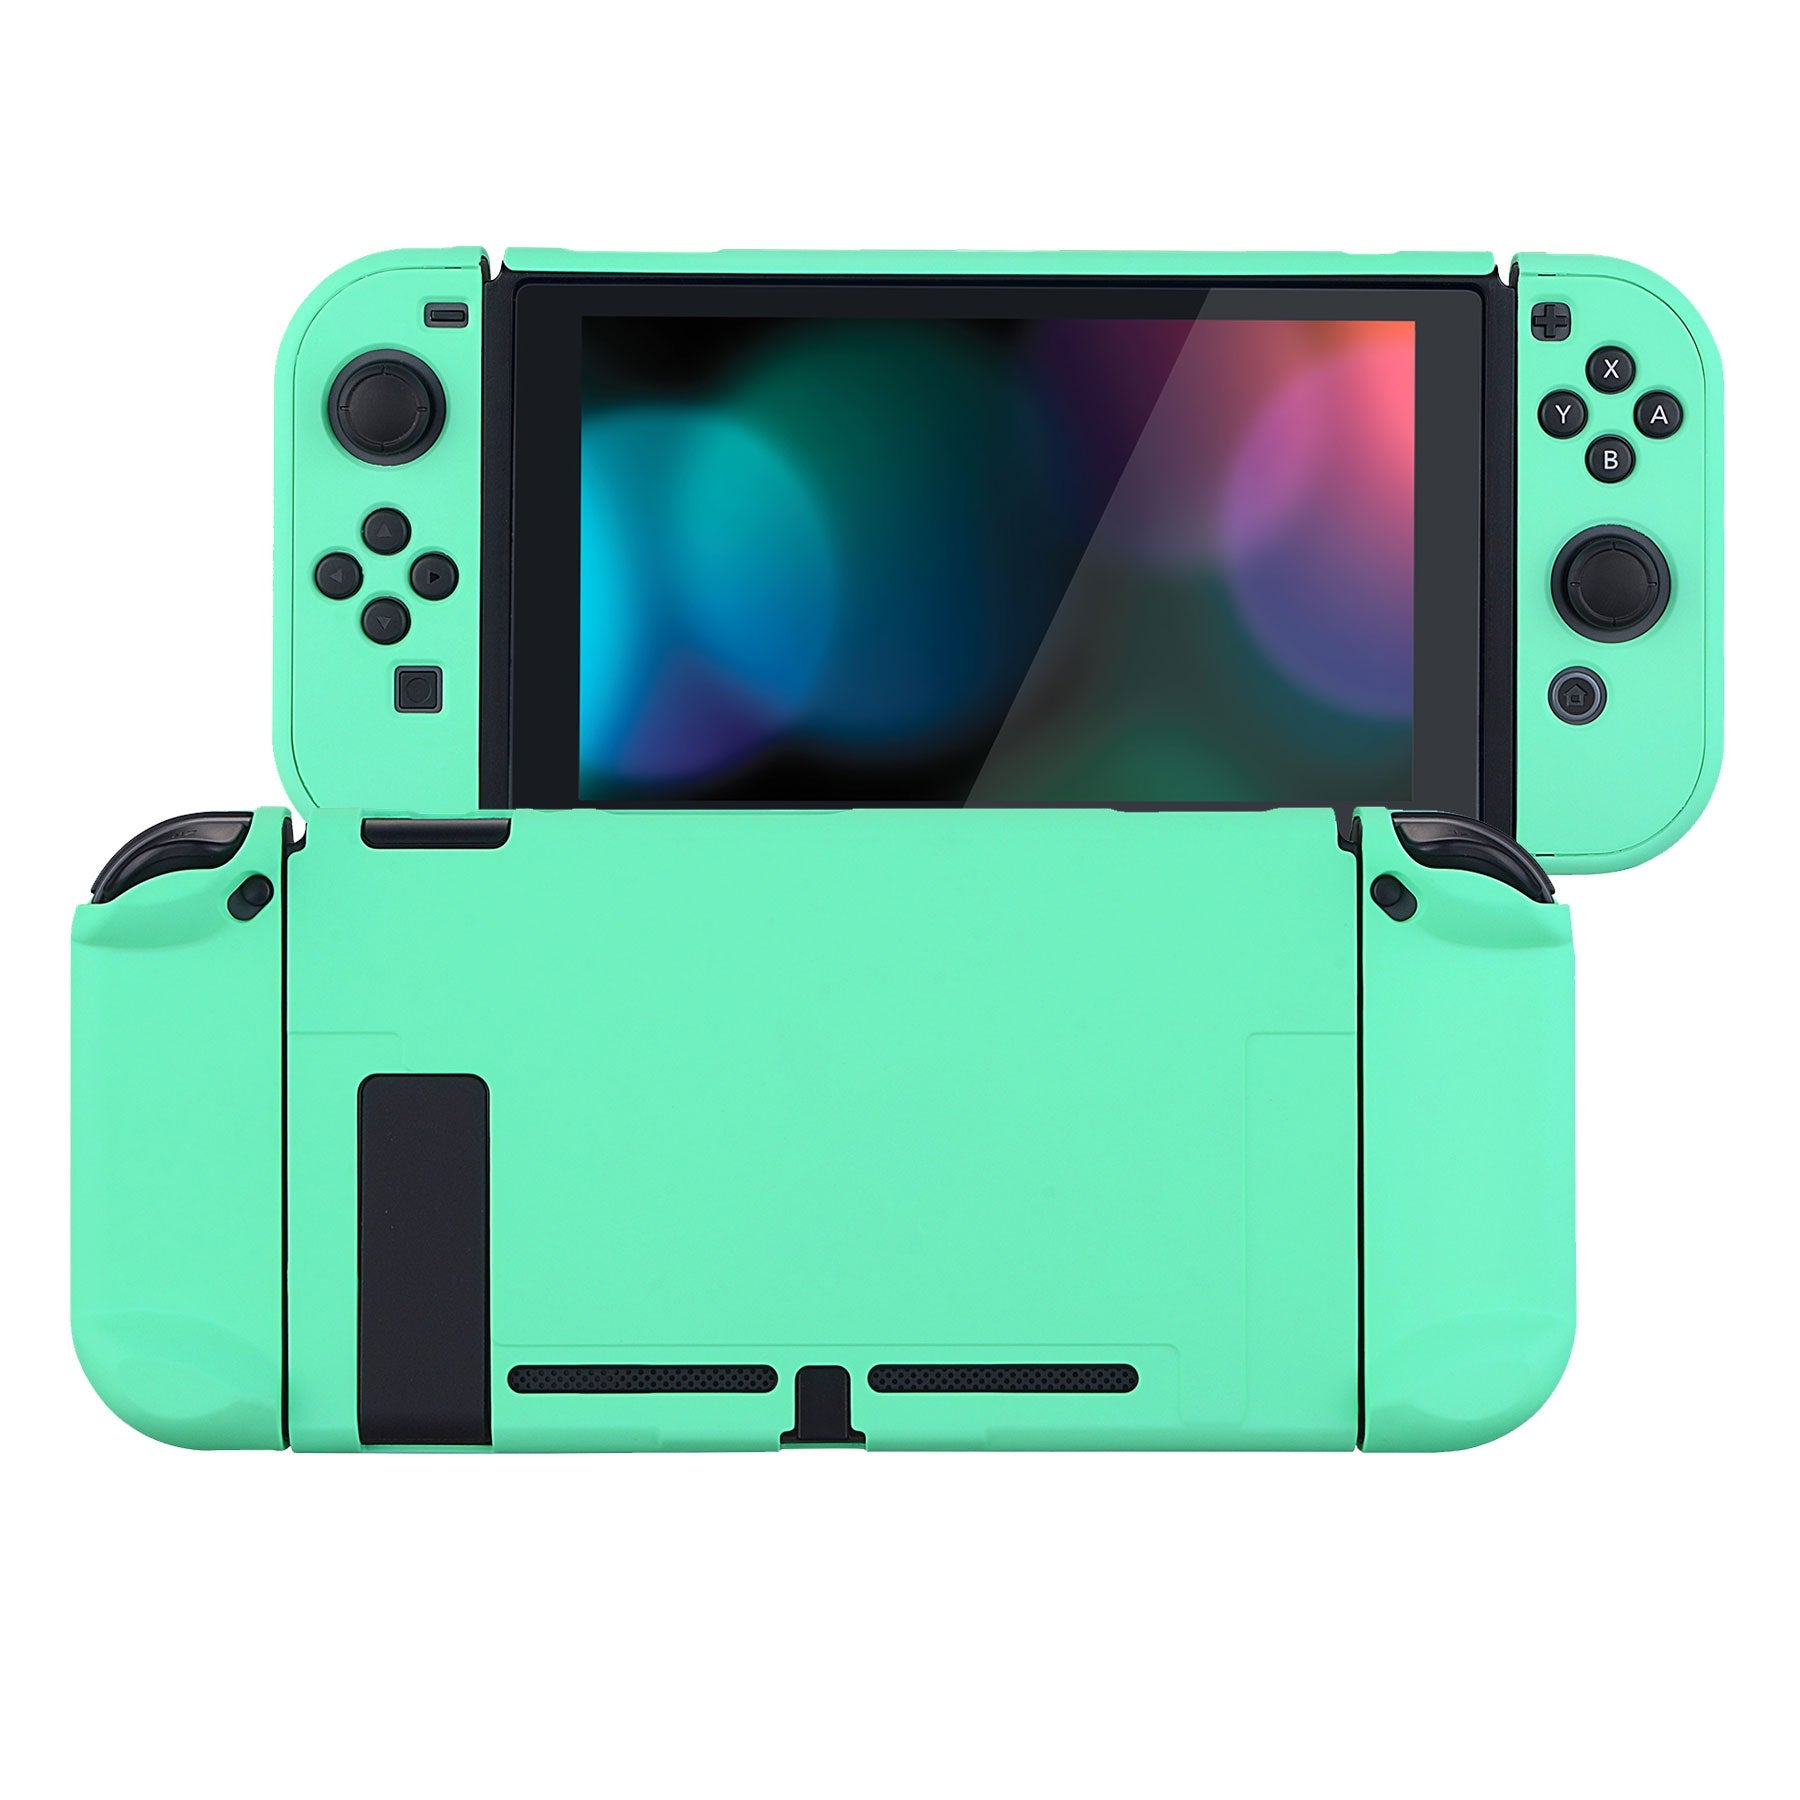 PlayVital Mint Green Back Cover for Nintendo Switch Console, NS Joycon Handheld Controller Separable Protector Hard Shell, Soft Touch Customized Dockable Protective Case for Nintendo Switch - NTP314 PlayVital